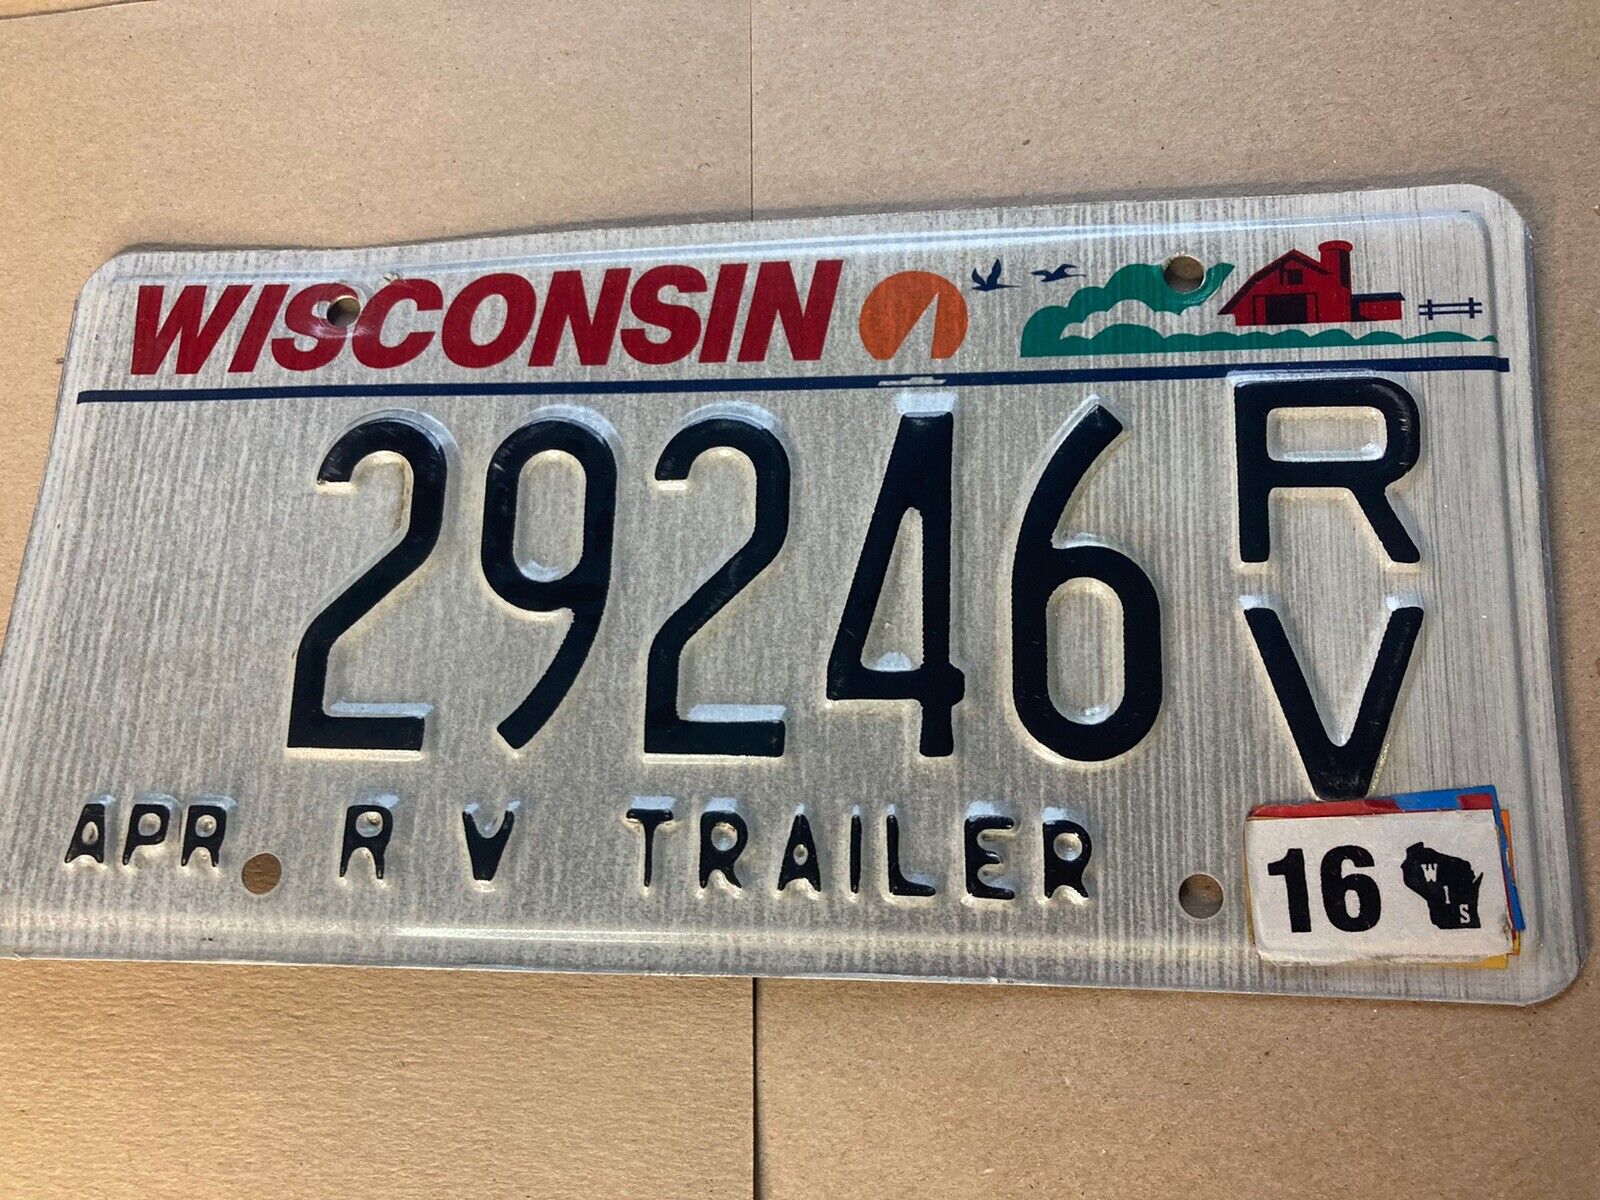 VERY CLEAN 2016 WISCONSIN RV TRAILER EXPIRED LICENSE PLATE  247